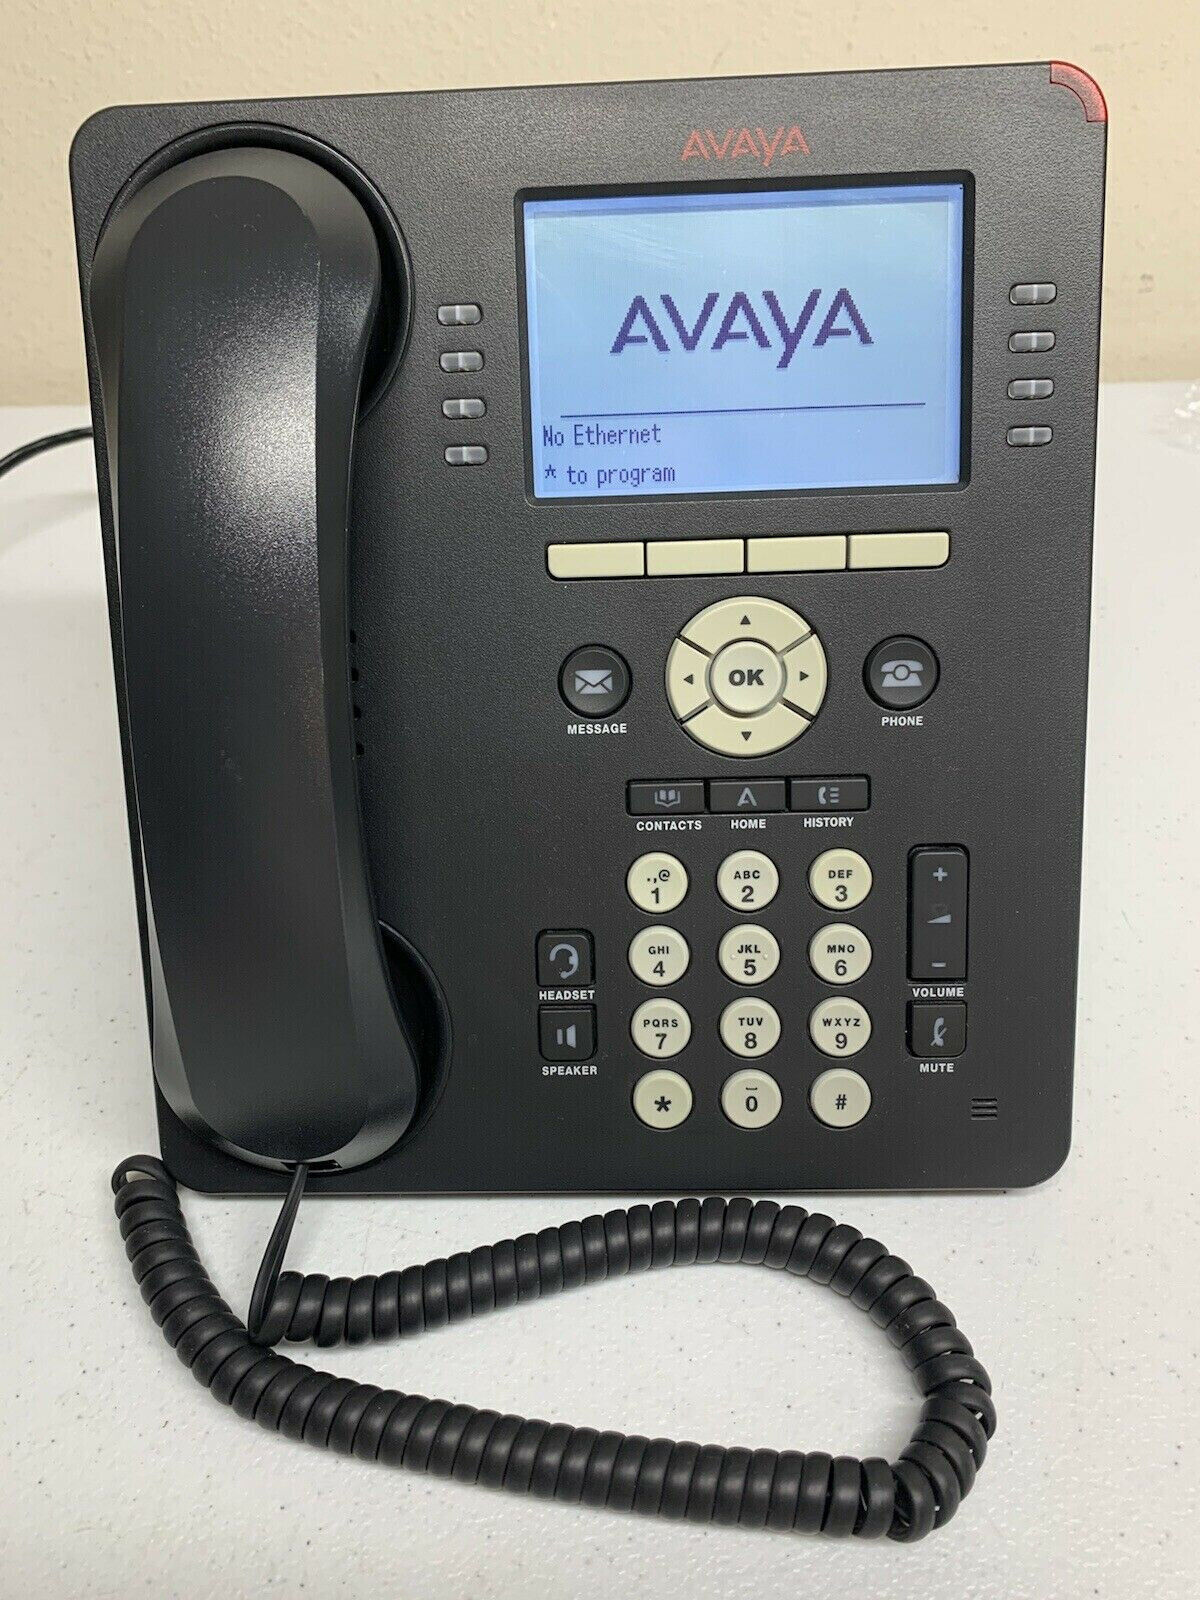 Avaya 9608 IP Phone with Stand 9608D01A 1009 VoIP 700480585 Telephone